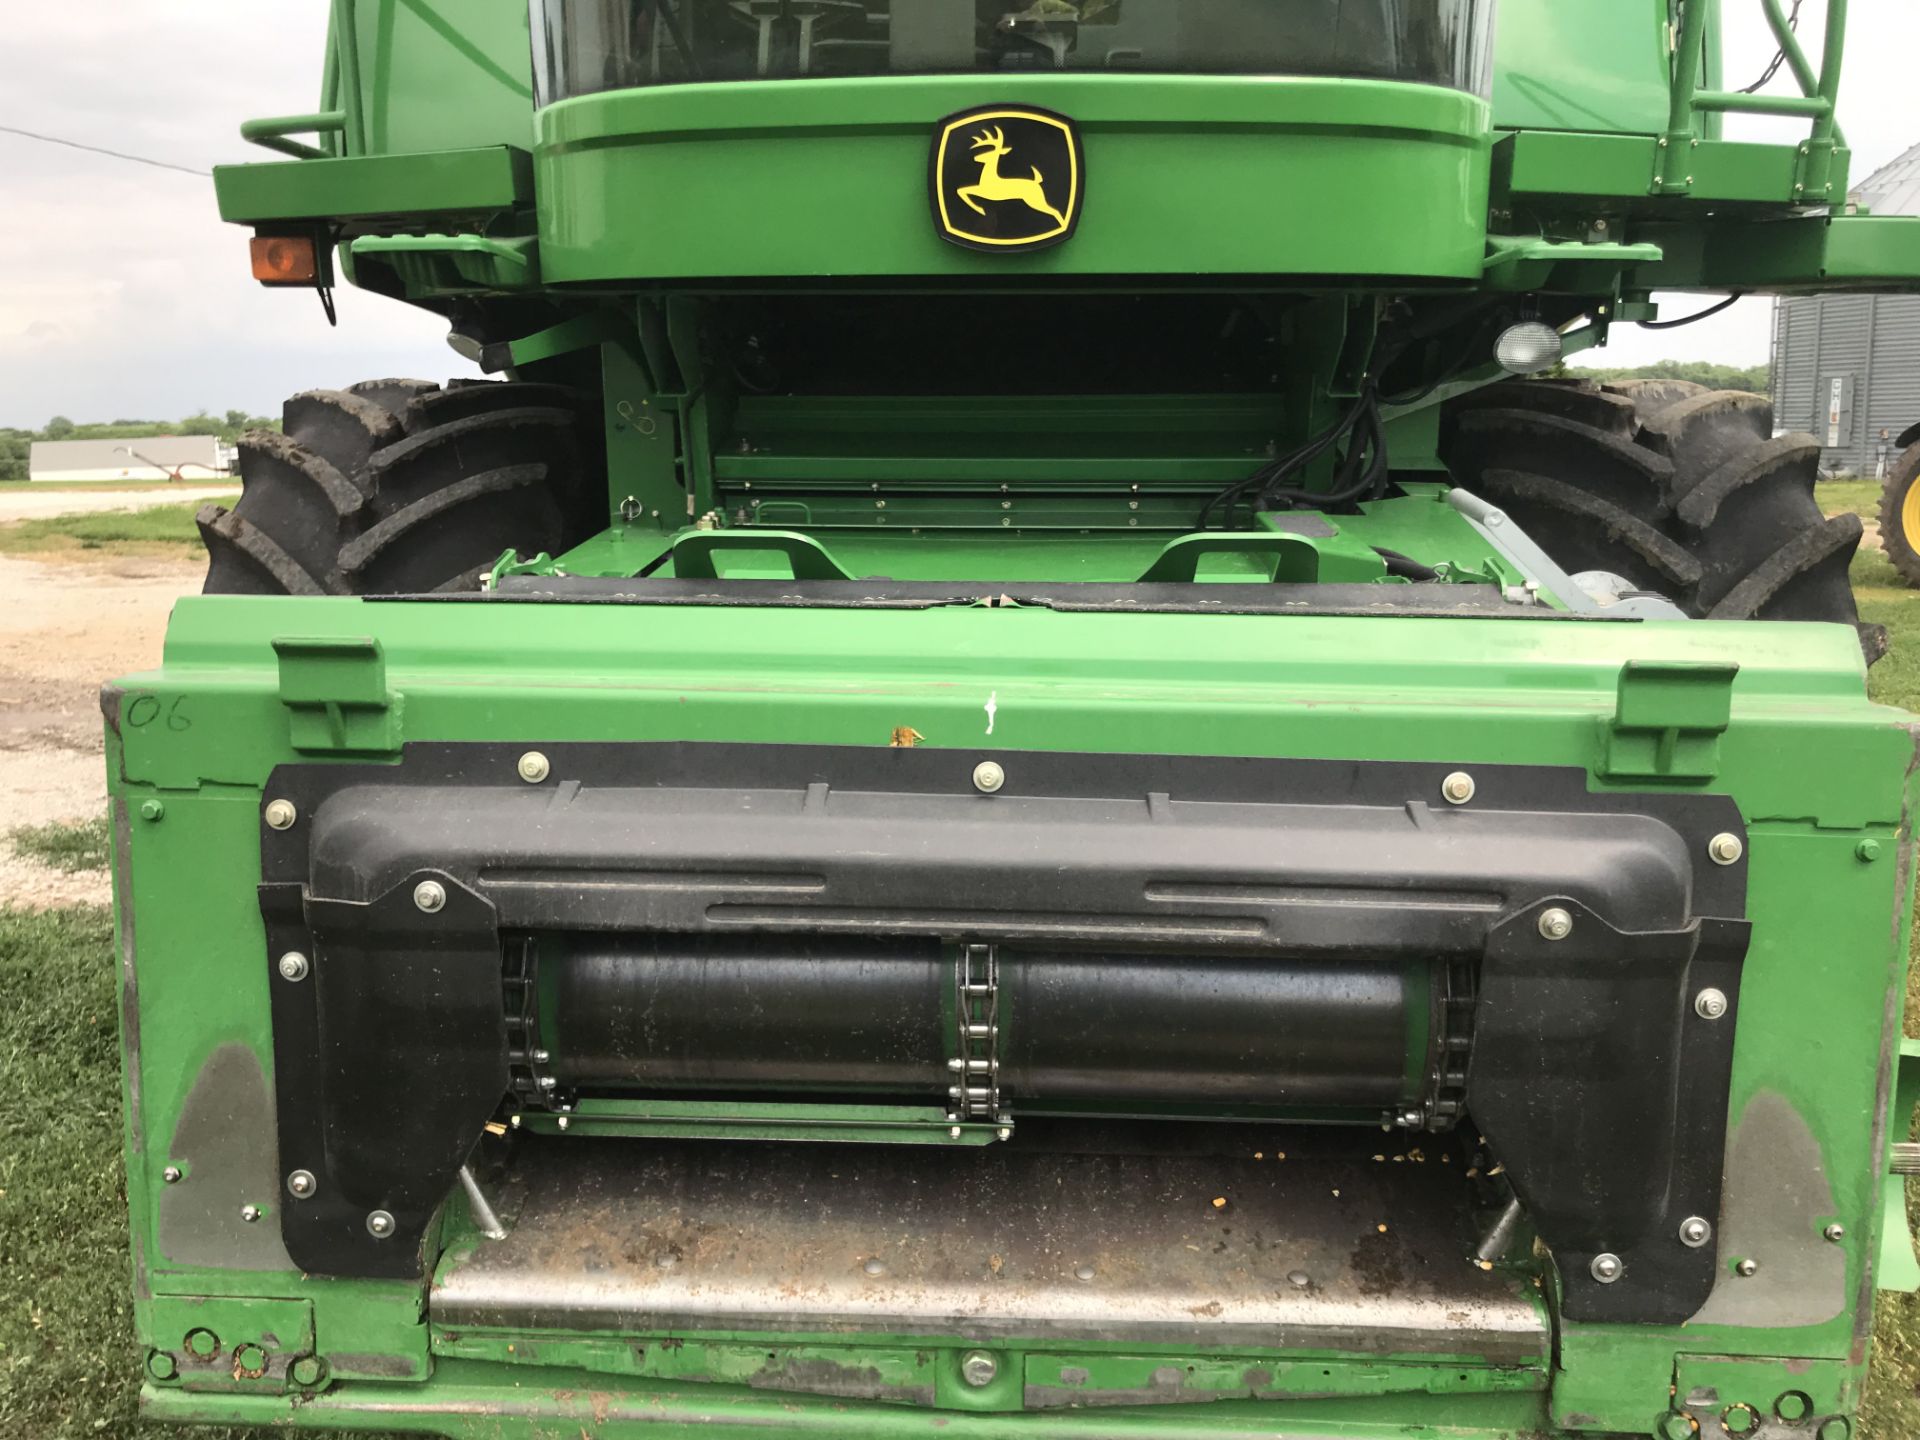 2008 JD 9570 STS Bullet Rotor S#725638, Chopper, Premier Cab & Control Center, Contour-Master Feeder - Image 8 of 11